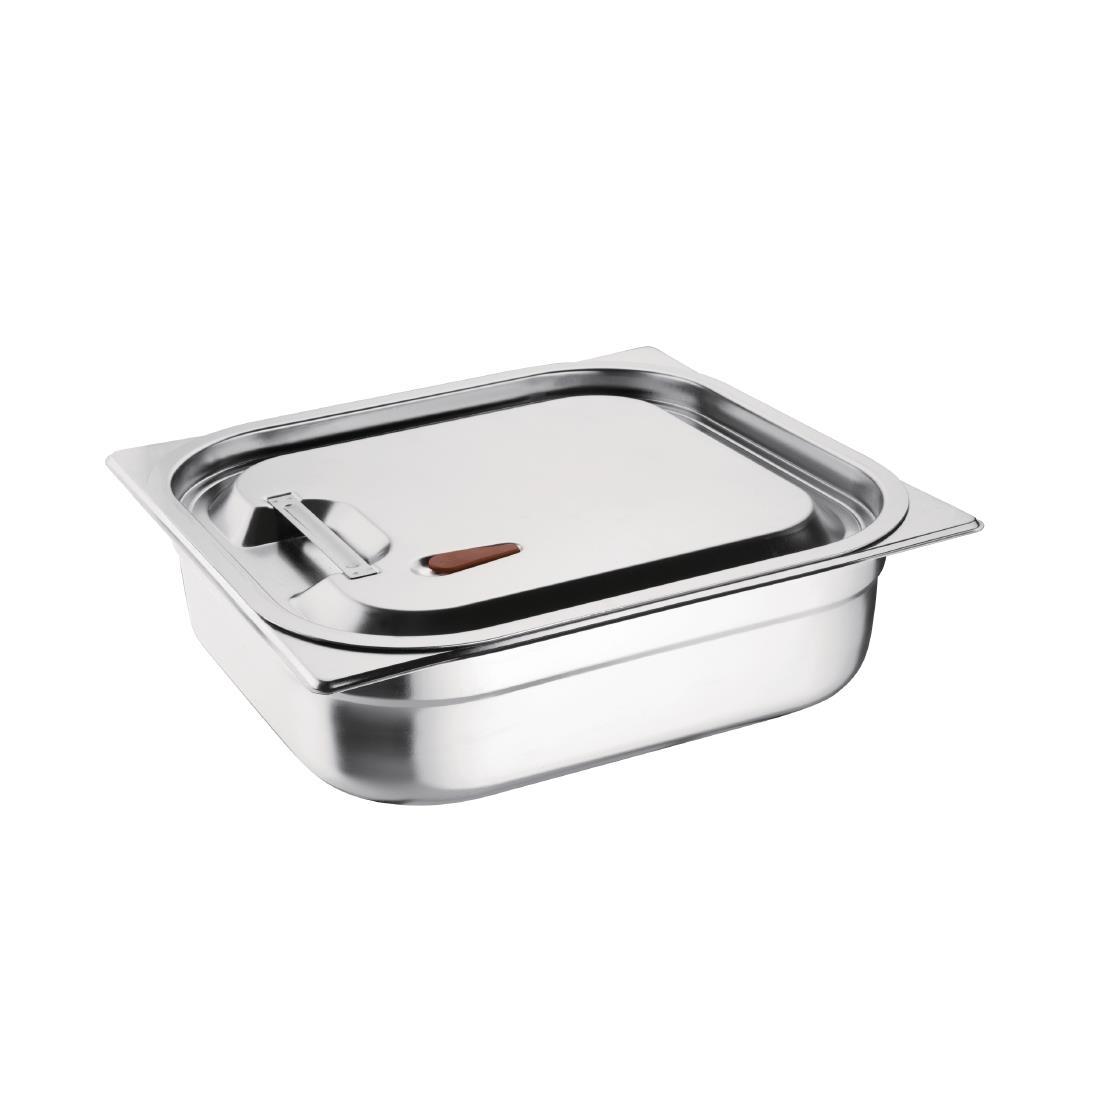 Vogue Stainless Steel and Silicone Sealable 1/2 Gastronorm Lid - CP269  - 2